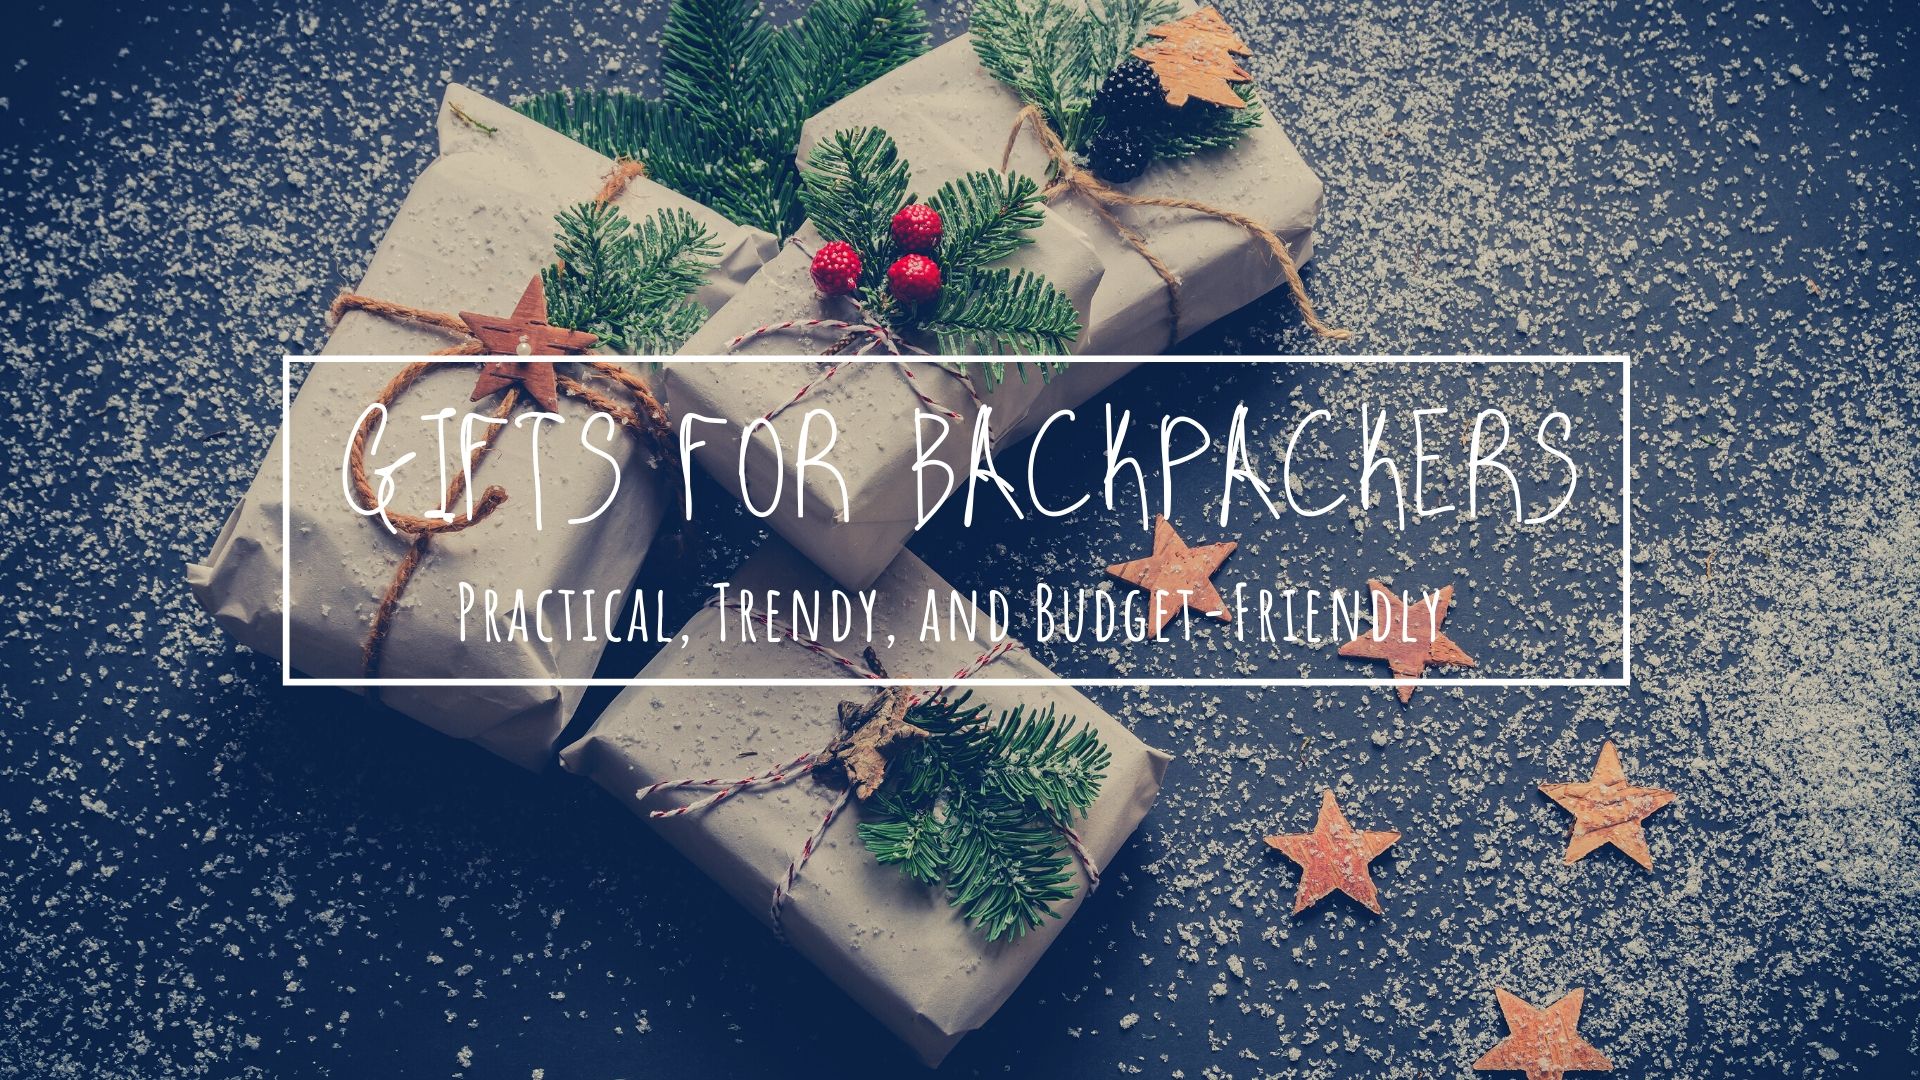 Gift guide for backpackers, backpackers gift guide, perfect gifts for travelers and backpackers, gifts for backpackers in 2019 cover